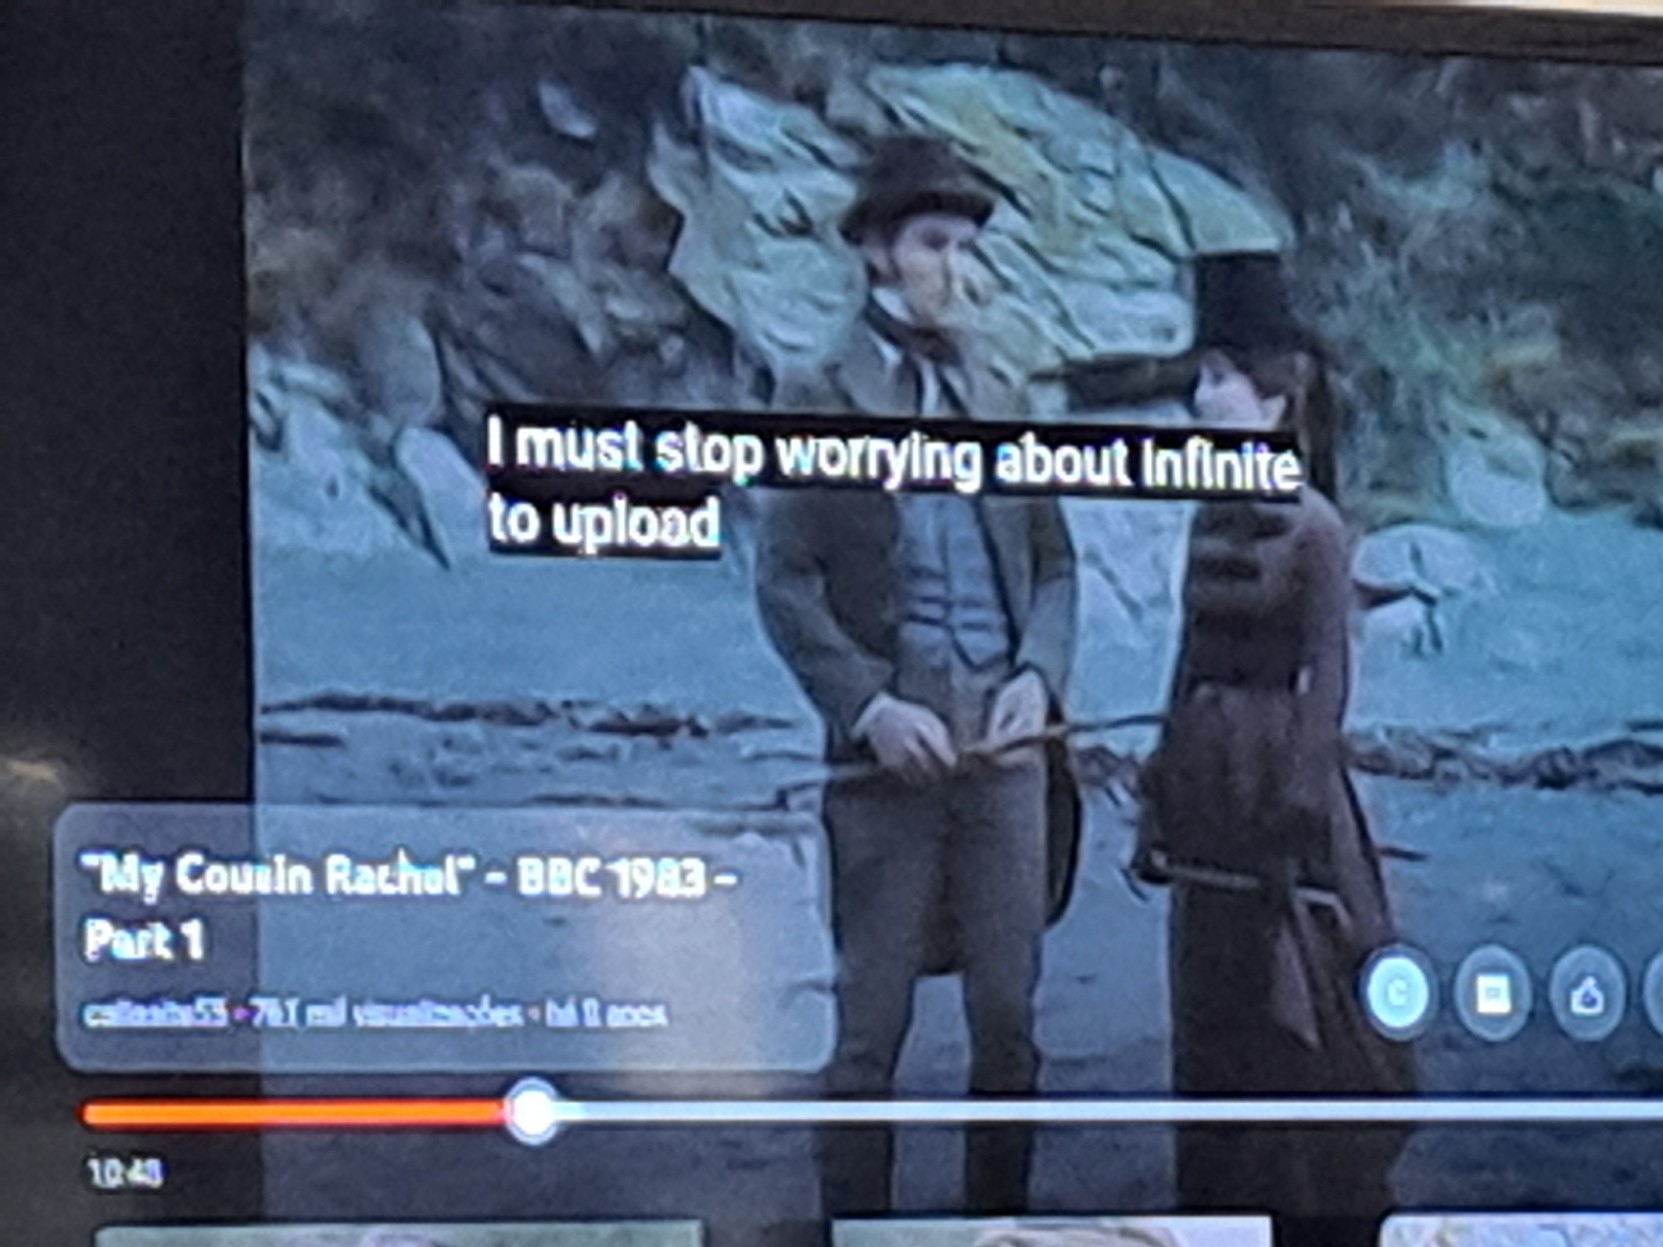 A picture of 1983's BBC adaptation of "My Cousin Rachel" playing on YouTube, the subtitles saying: "I must stop worrying about infinite to upload".